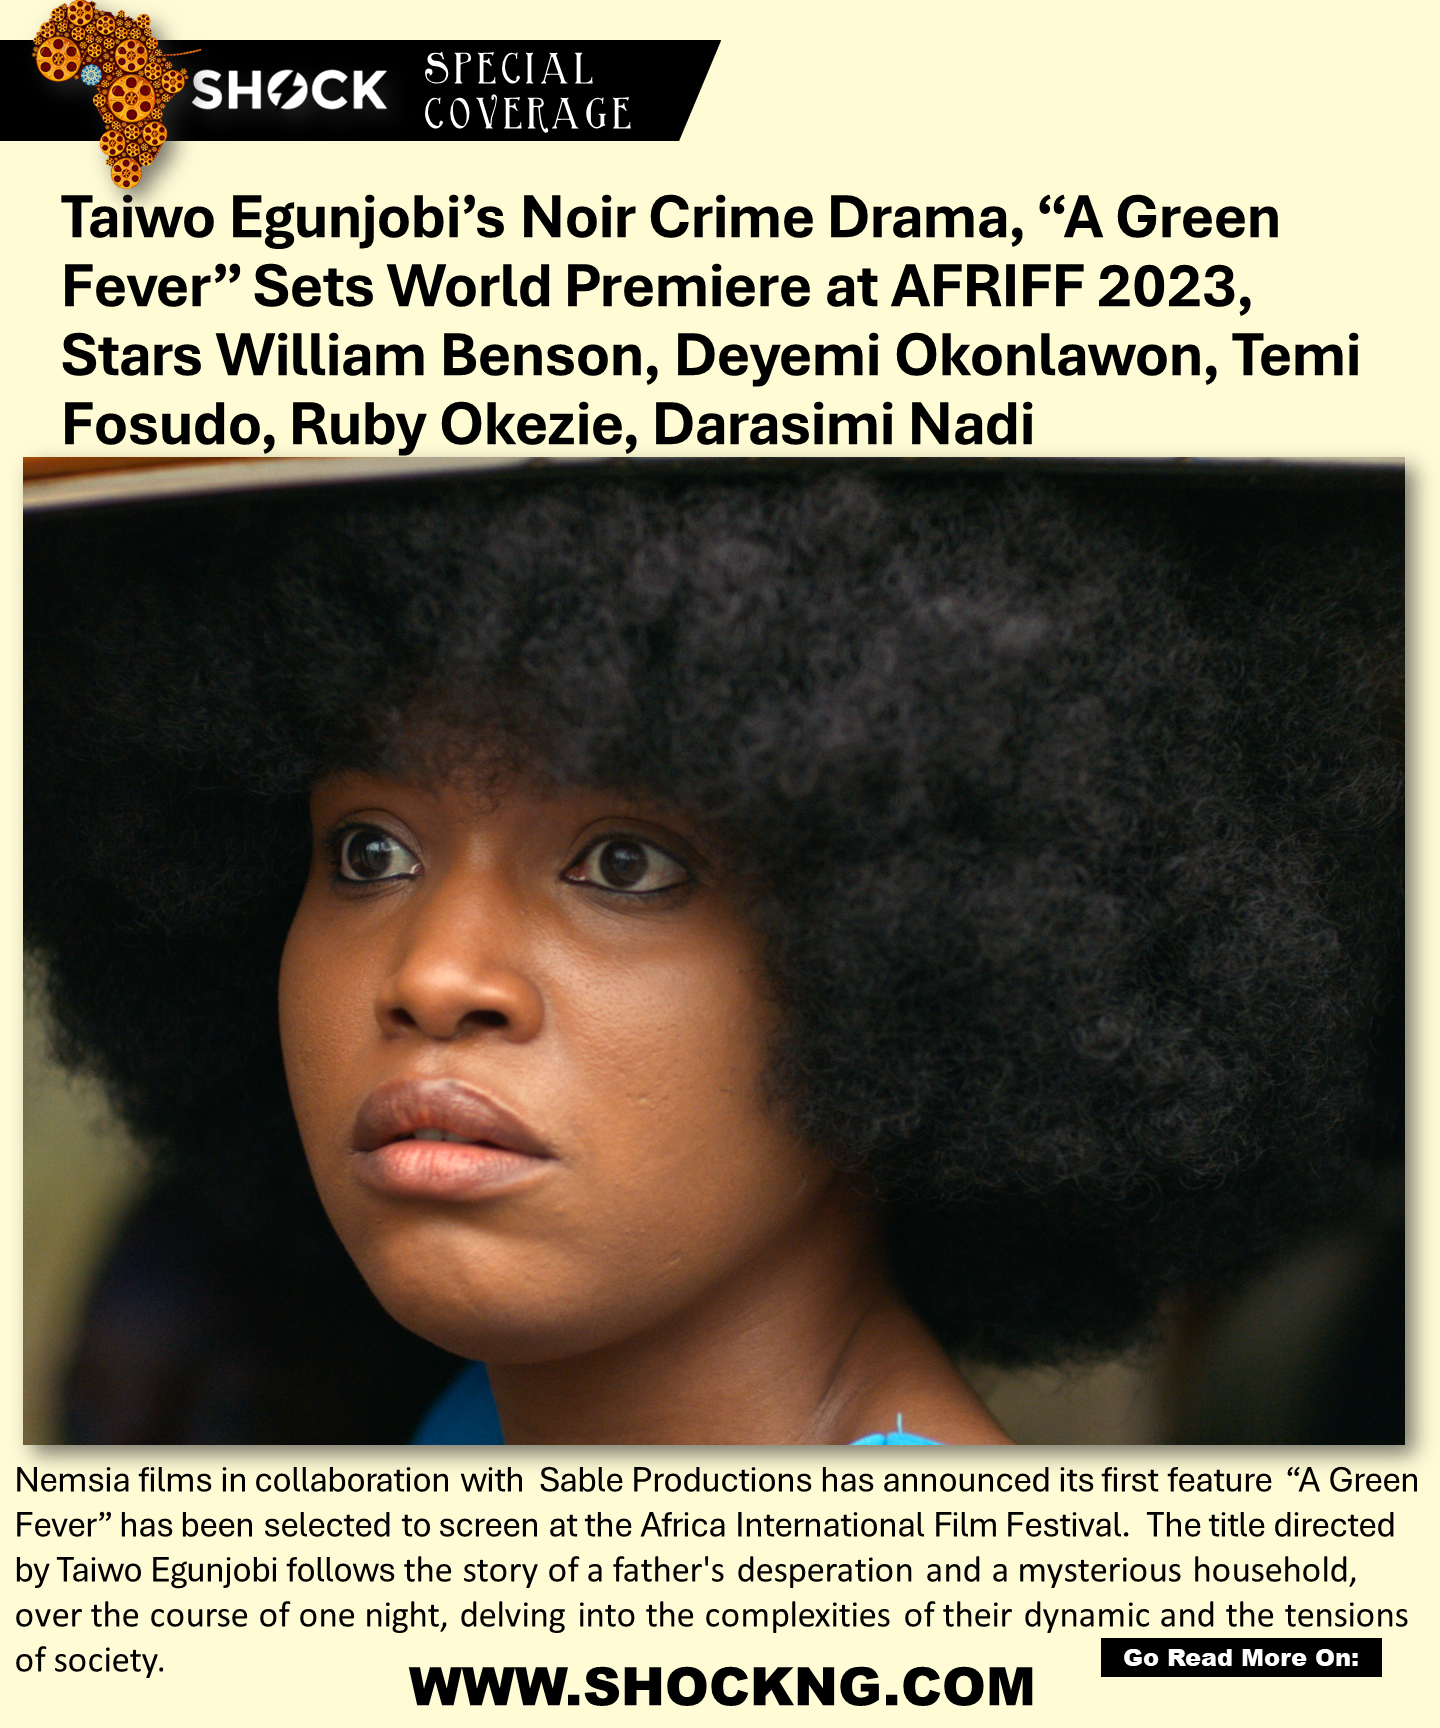 AGT SHOCK HEADLINE - Taiwo Egunjobi’s Noir Drama, “A Green Fever” To Screen in Competition at AFRIFF 2023